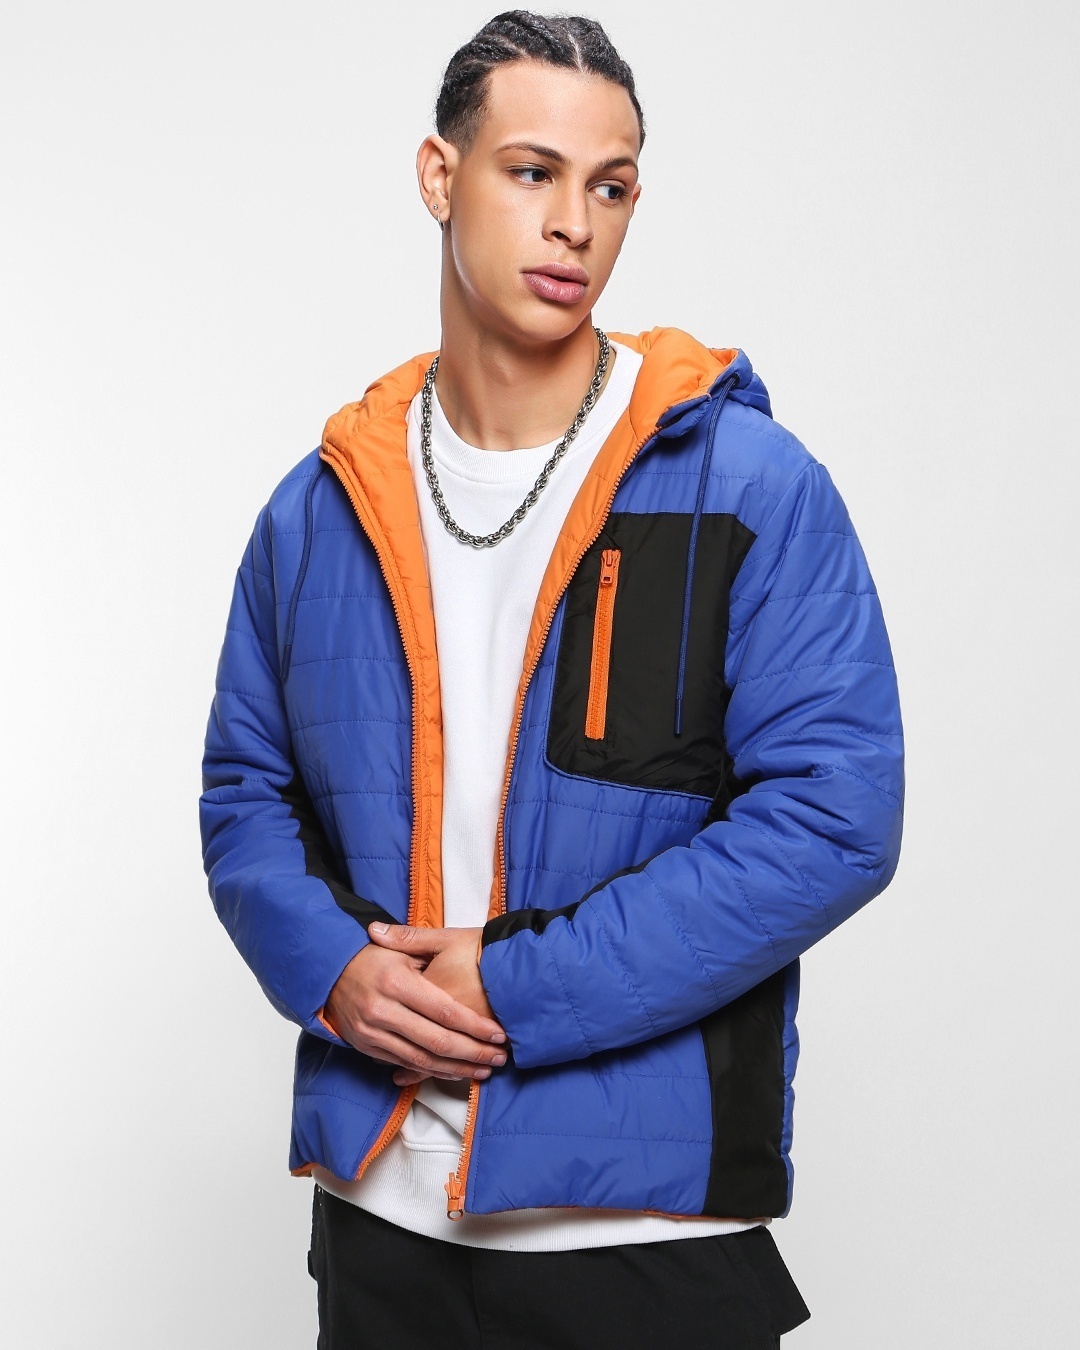 HolloMen Onyx Orange Jacket | Stand Out Slim-Fit Style for Special Events